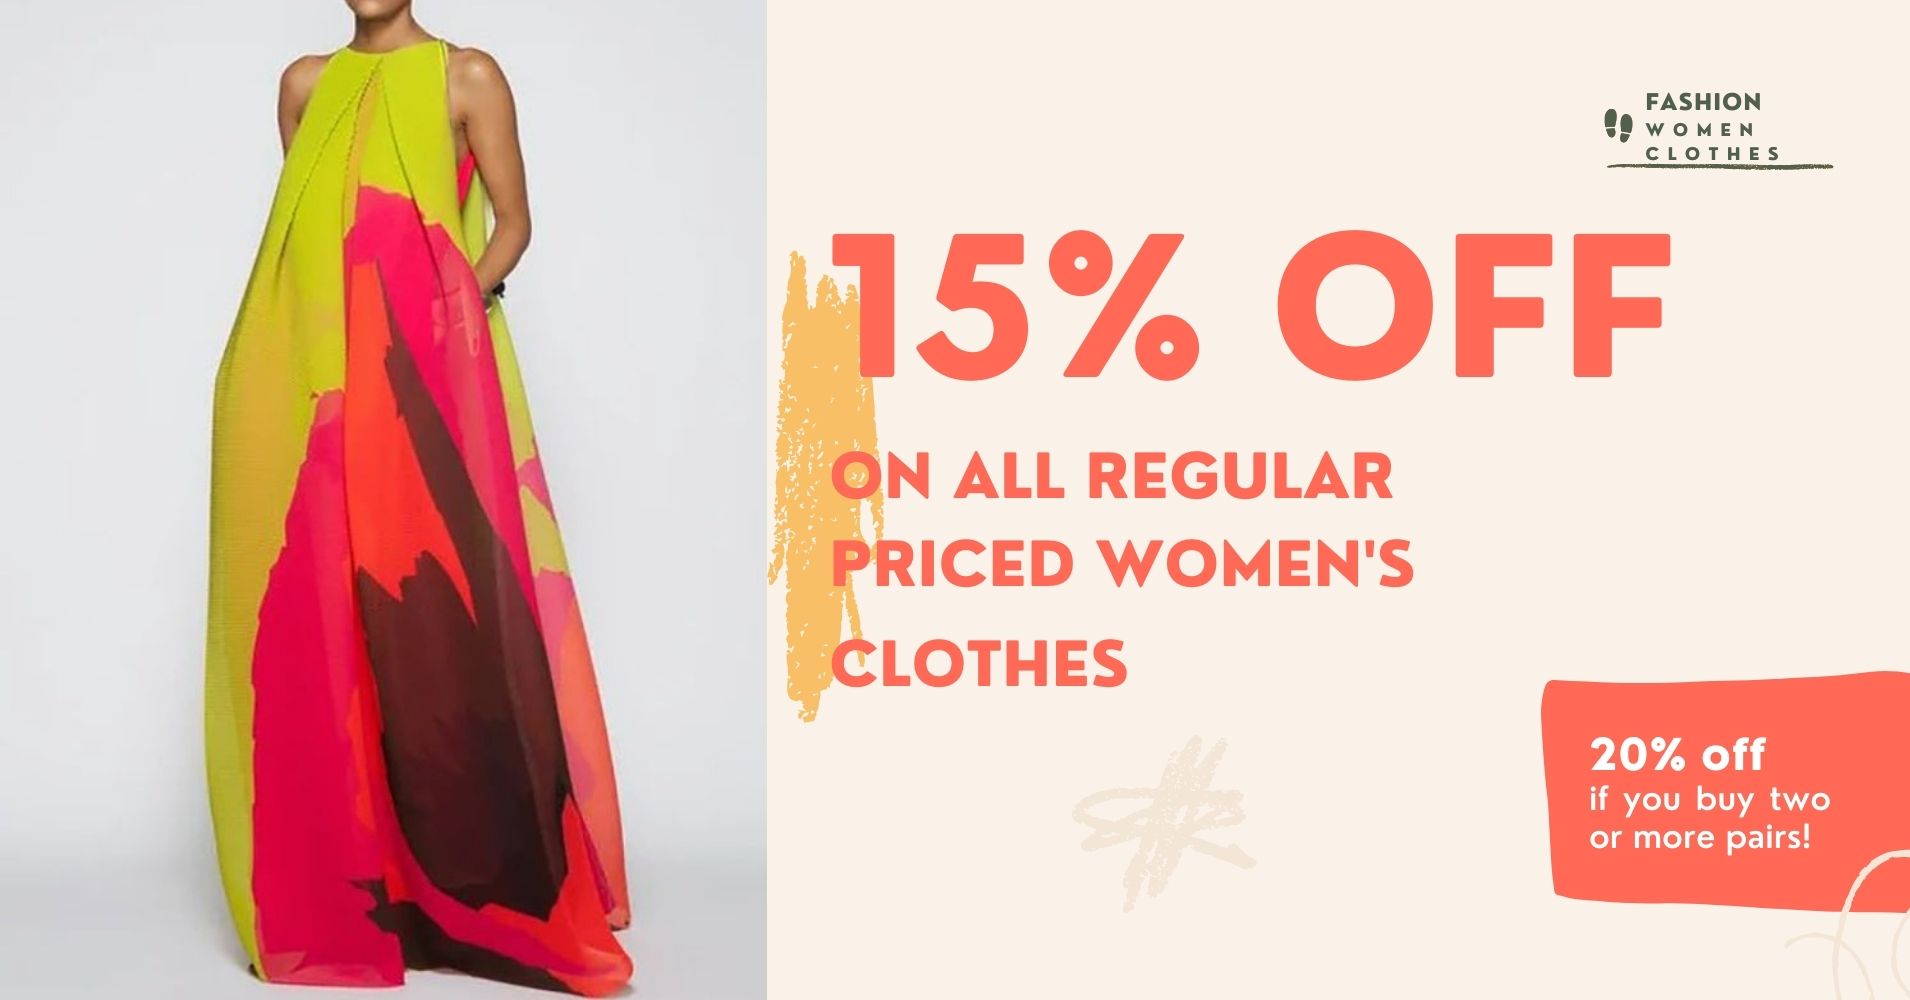 FASHION 0 women ccccccc 15% OFF ON ALL REGULAR PRICED WOMEN'S CLOTHES 20% off if you buy two or more pairs! 